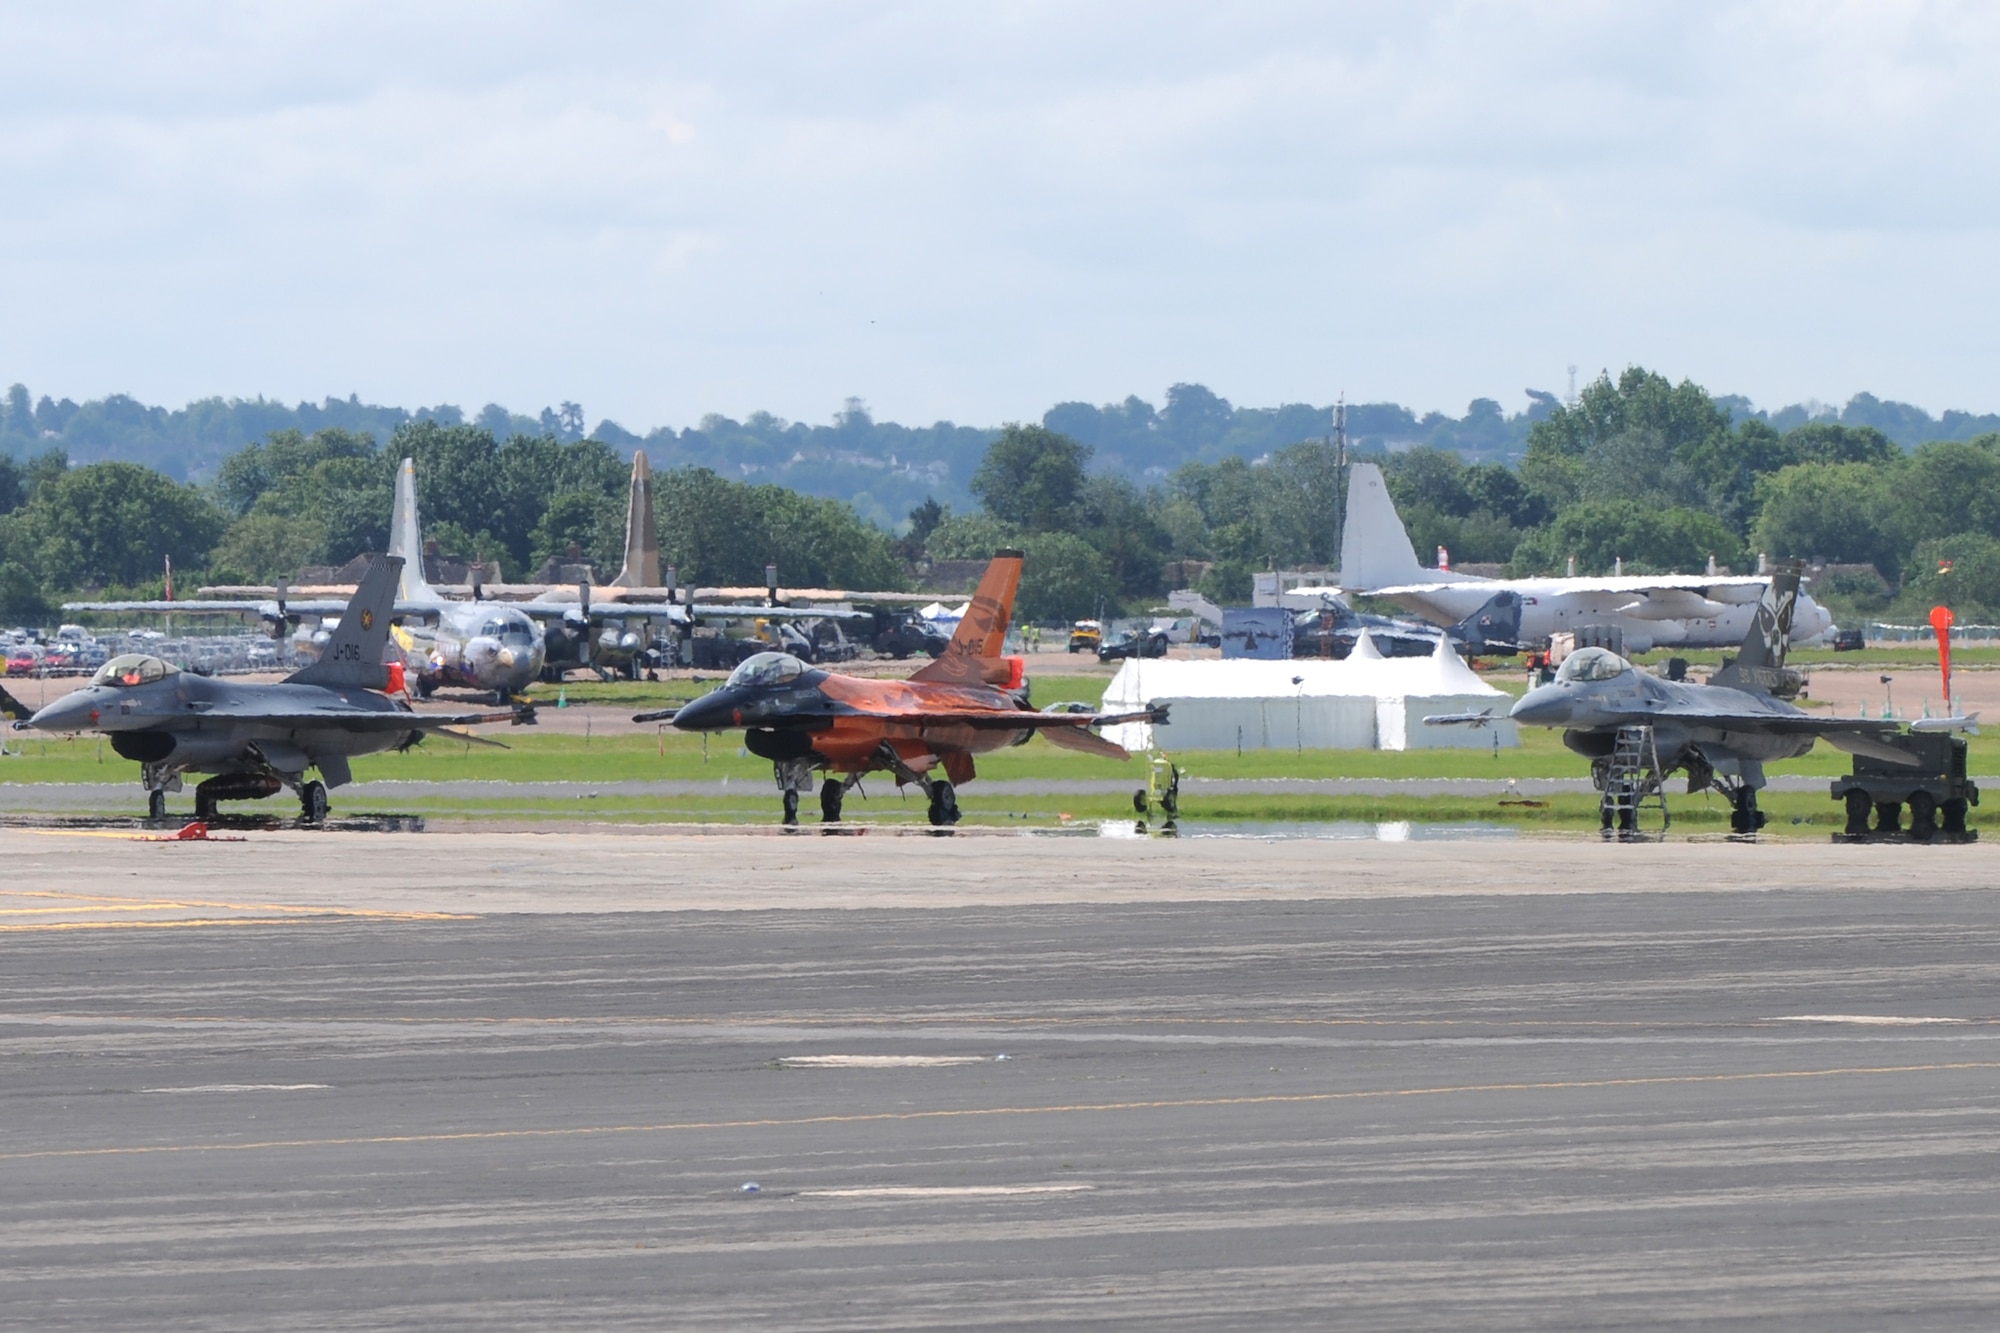 RAF FAIRFORD, United Kingdom - More than 260 aircraft participated in the Royal International Air Tattoo from 29 nations. (U.S. Air Force photo by Capt. Brian Maguire)